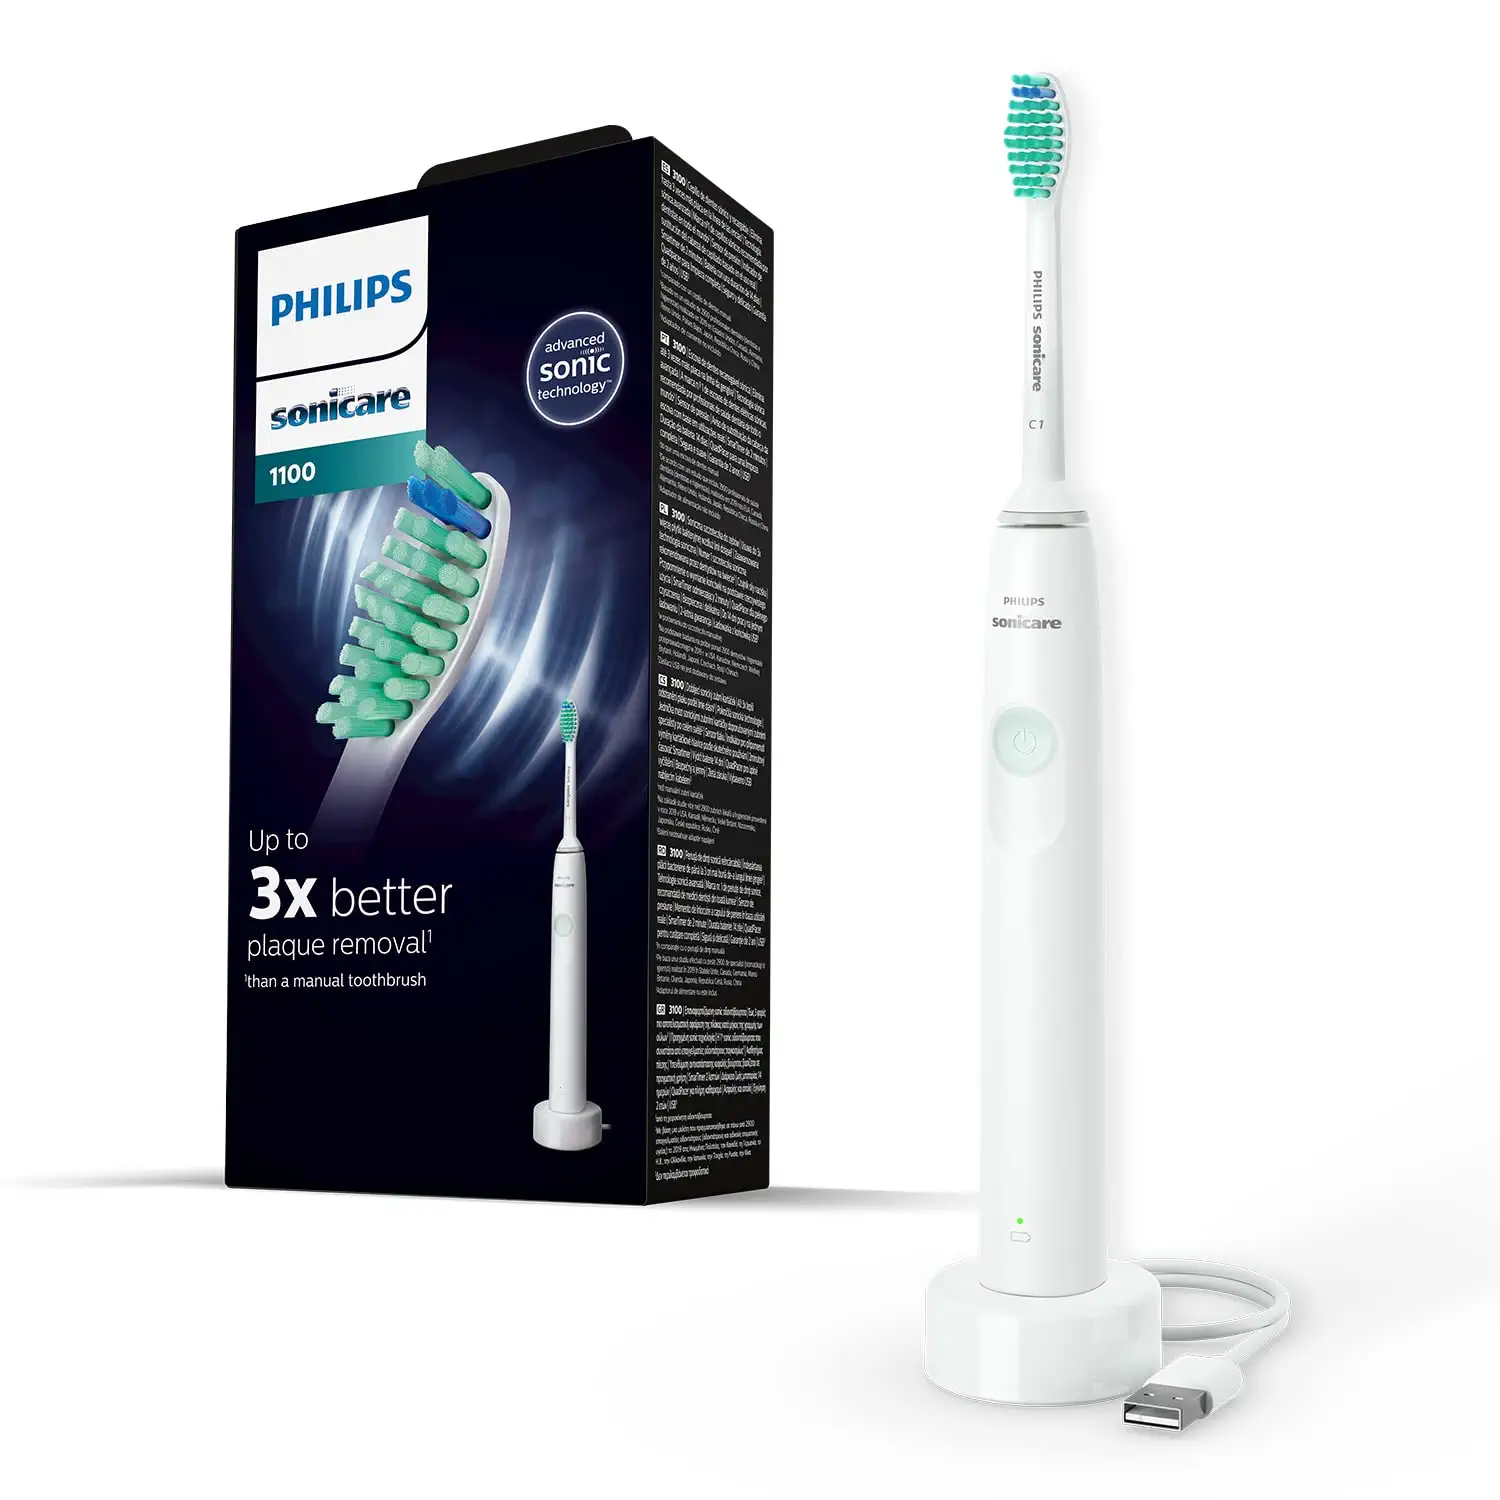 Philips HX3641 Sonicare Electric Toothbrush 1100 Series with Sonic Tec